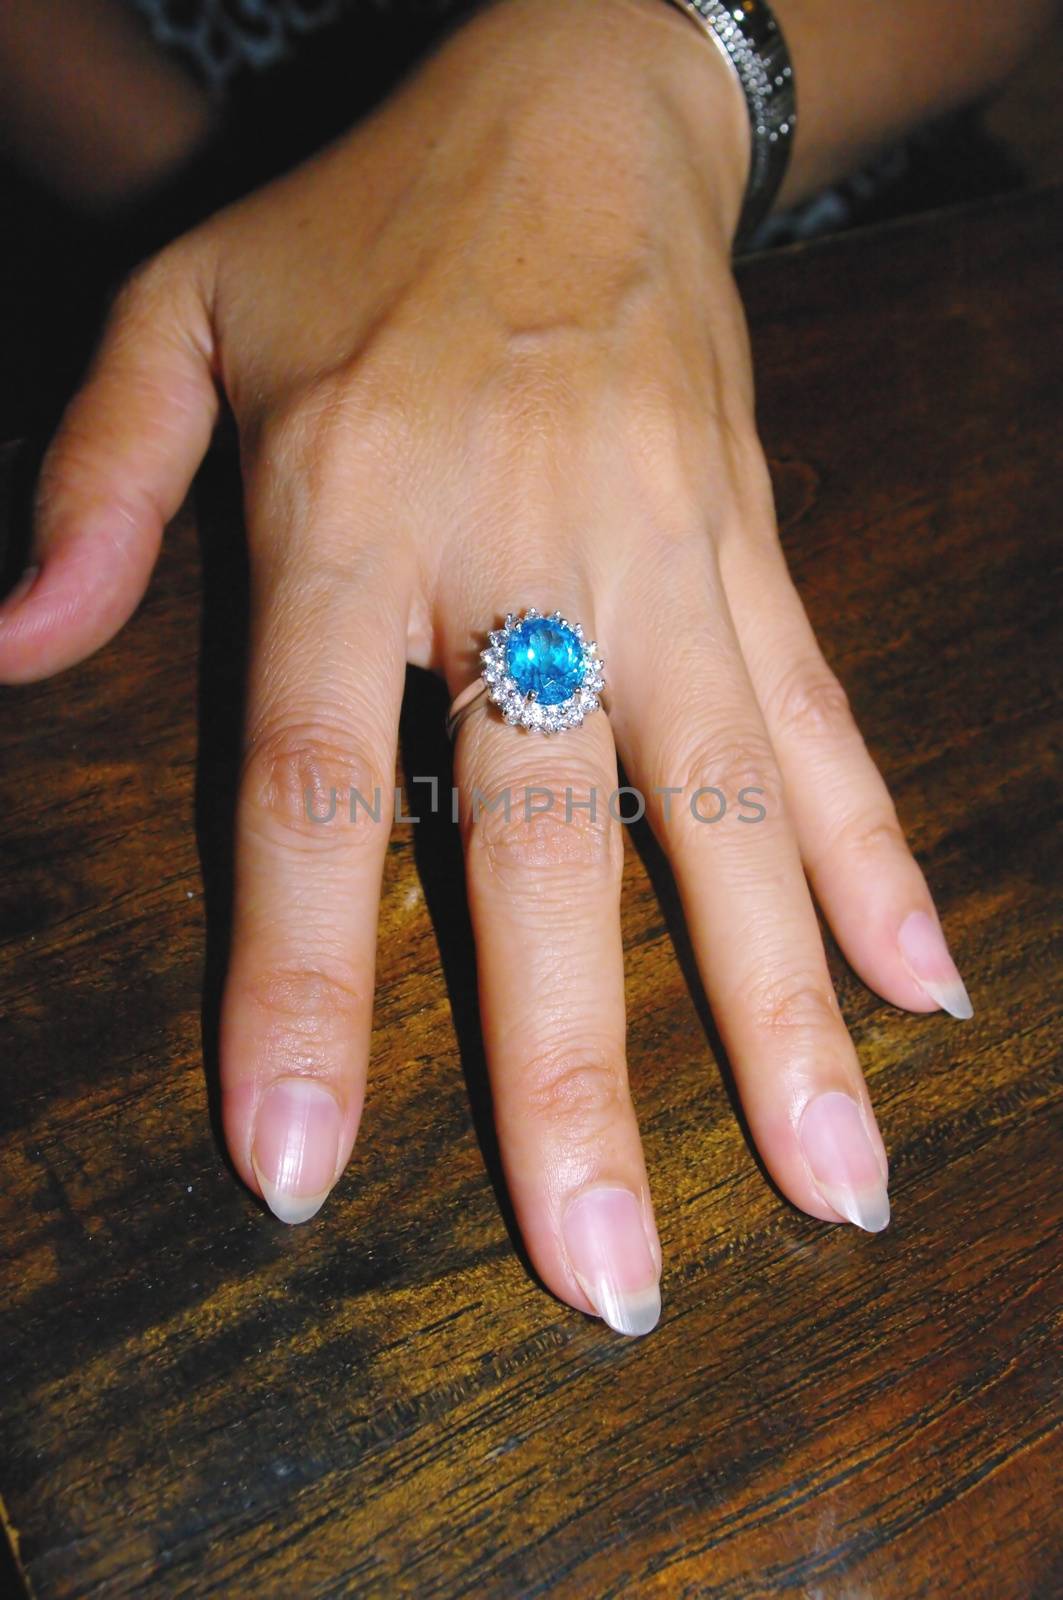 A woman's hand with an engagement ring. A topaz surrounded by diamonds on white gold setting